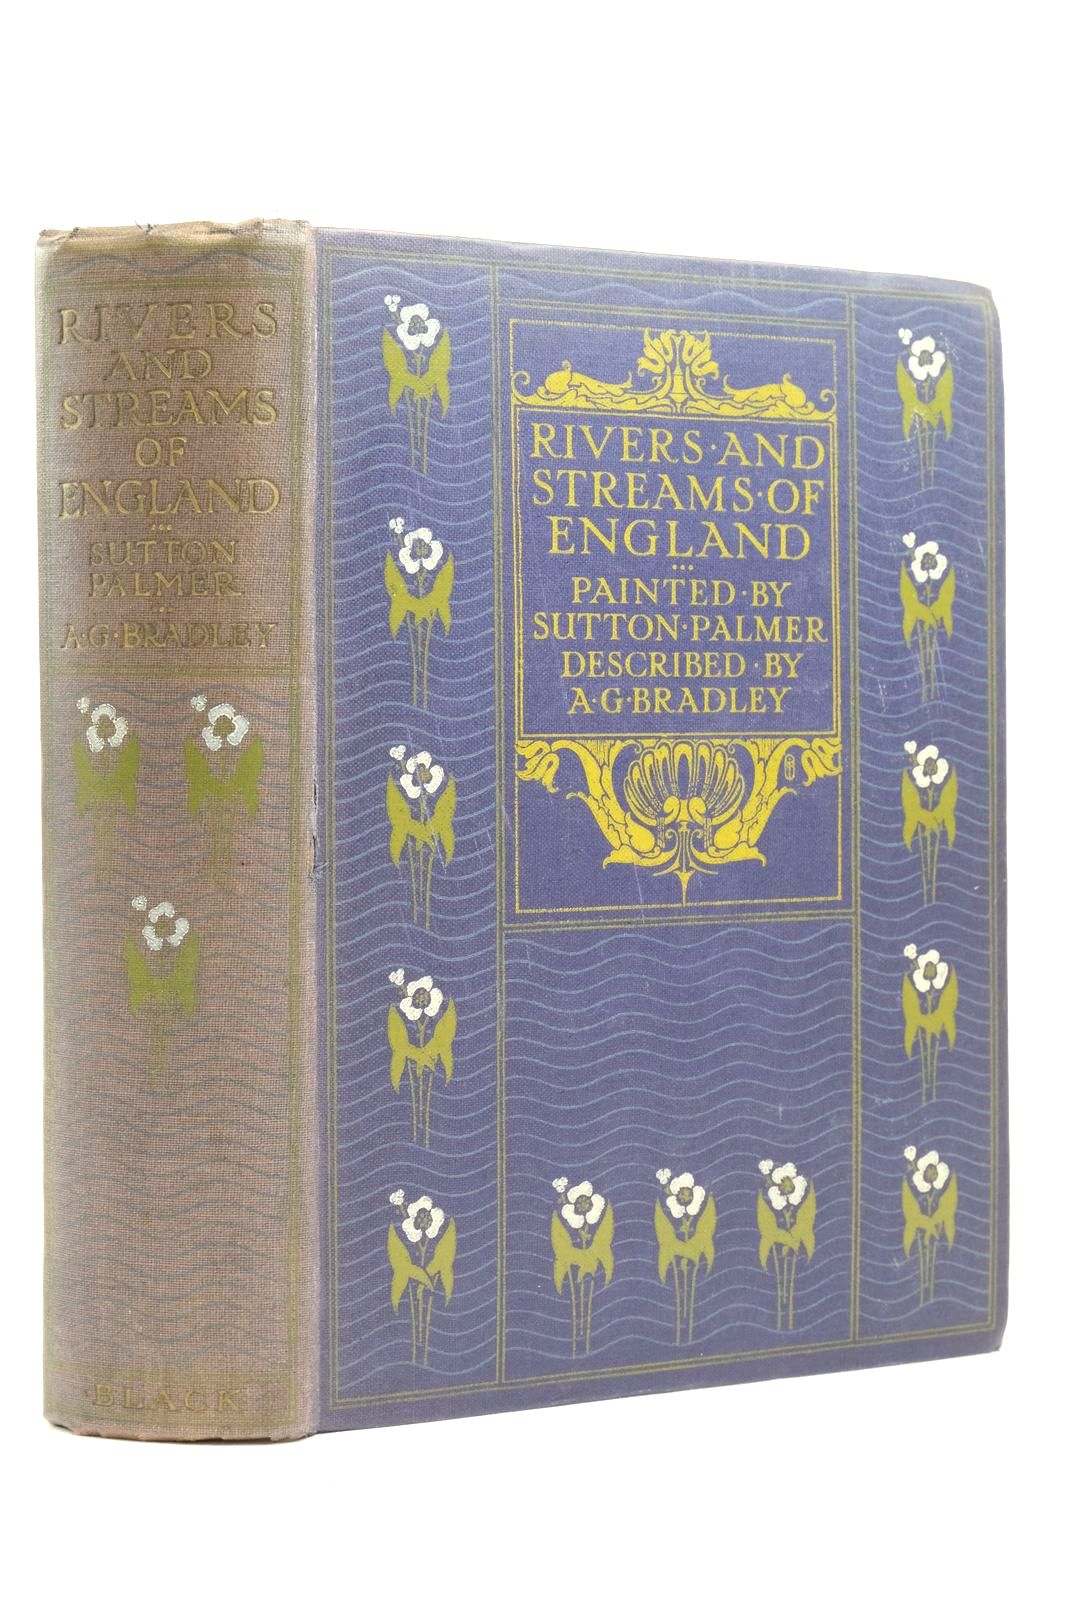 Photo of THE RIVERS AND STREAMS OF ENGLAND written by Bradley, A.G. illustrated by Palmer, Sutton published by Adam & Charles Black (STOCK CODE: 2137586)  for sale by Stella & Rose's Books